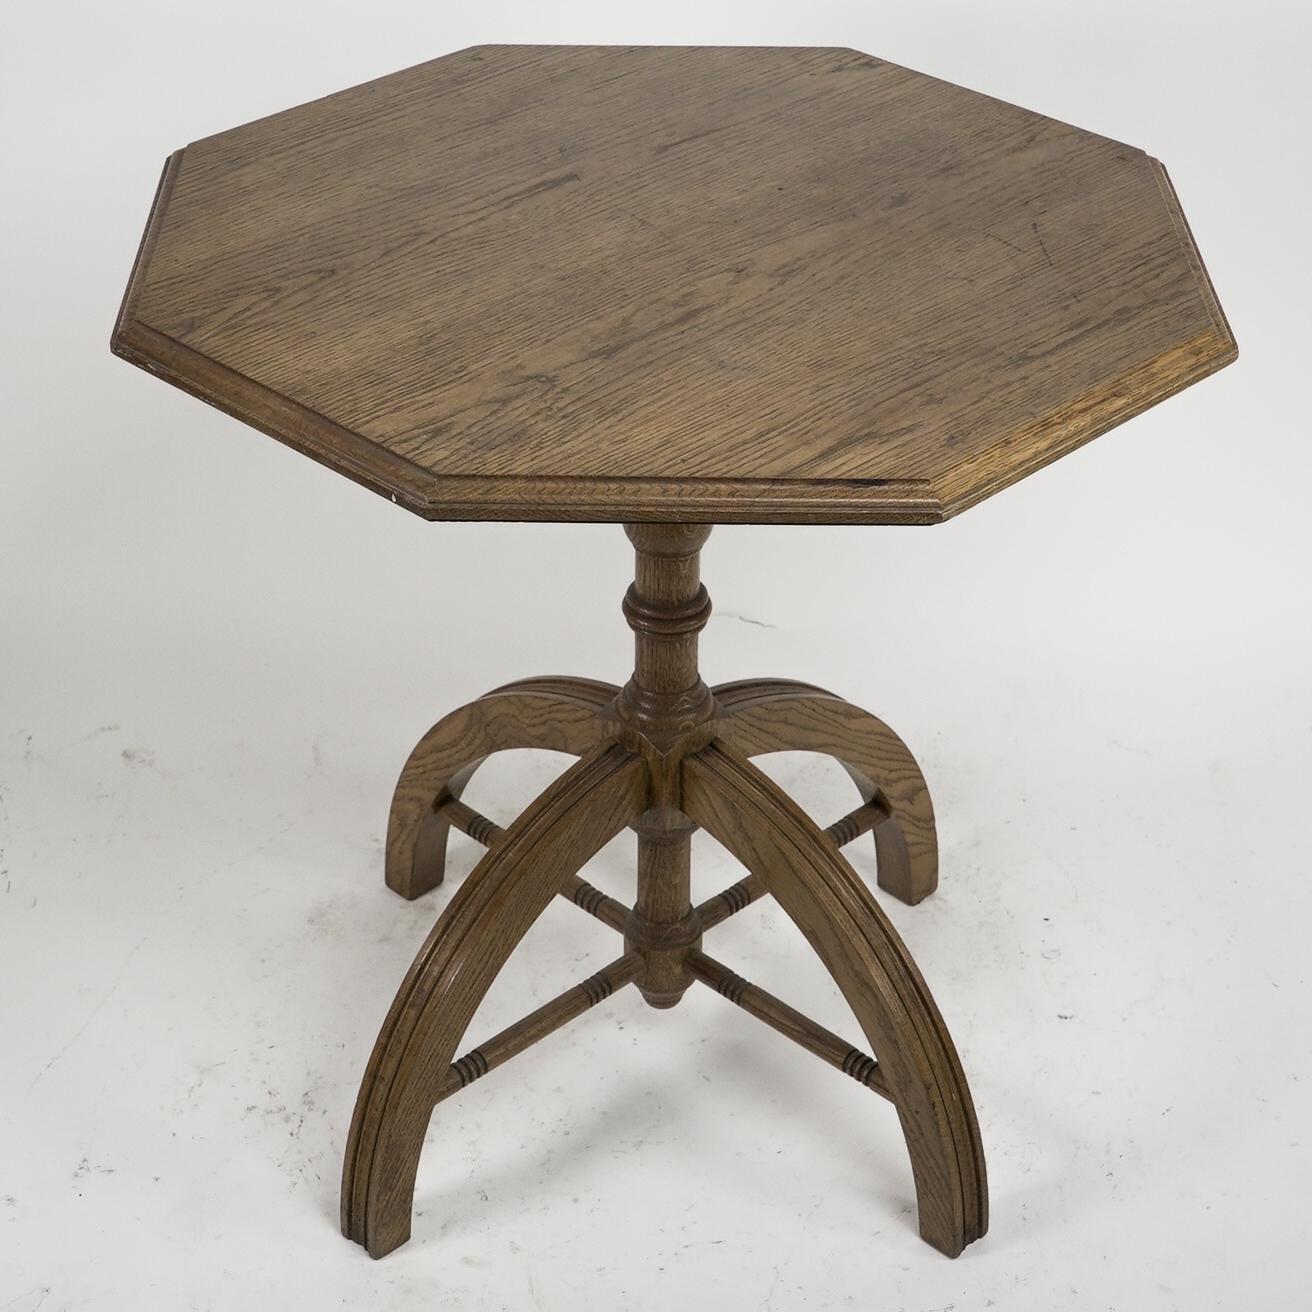 A W N Pugin after a design by. A modern craftsman made Gothic Revival oak octagonal centre table with a central upright turned column that passes through the arched legs uniting the lower legs by radiating turned stretchers.
Circa 1980's.